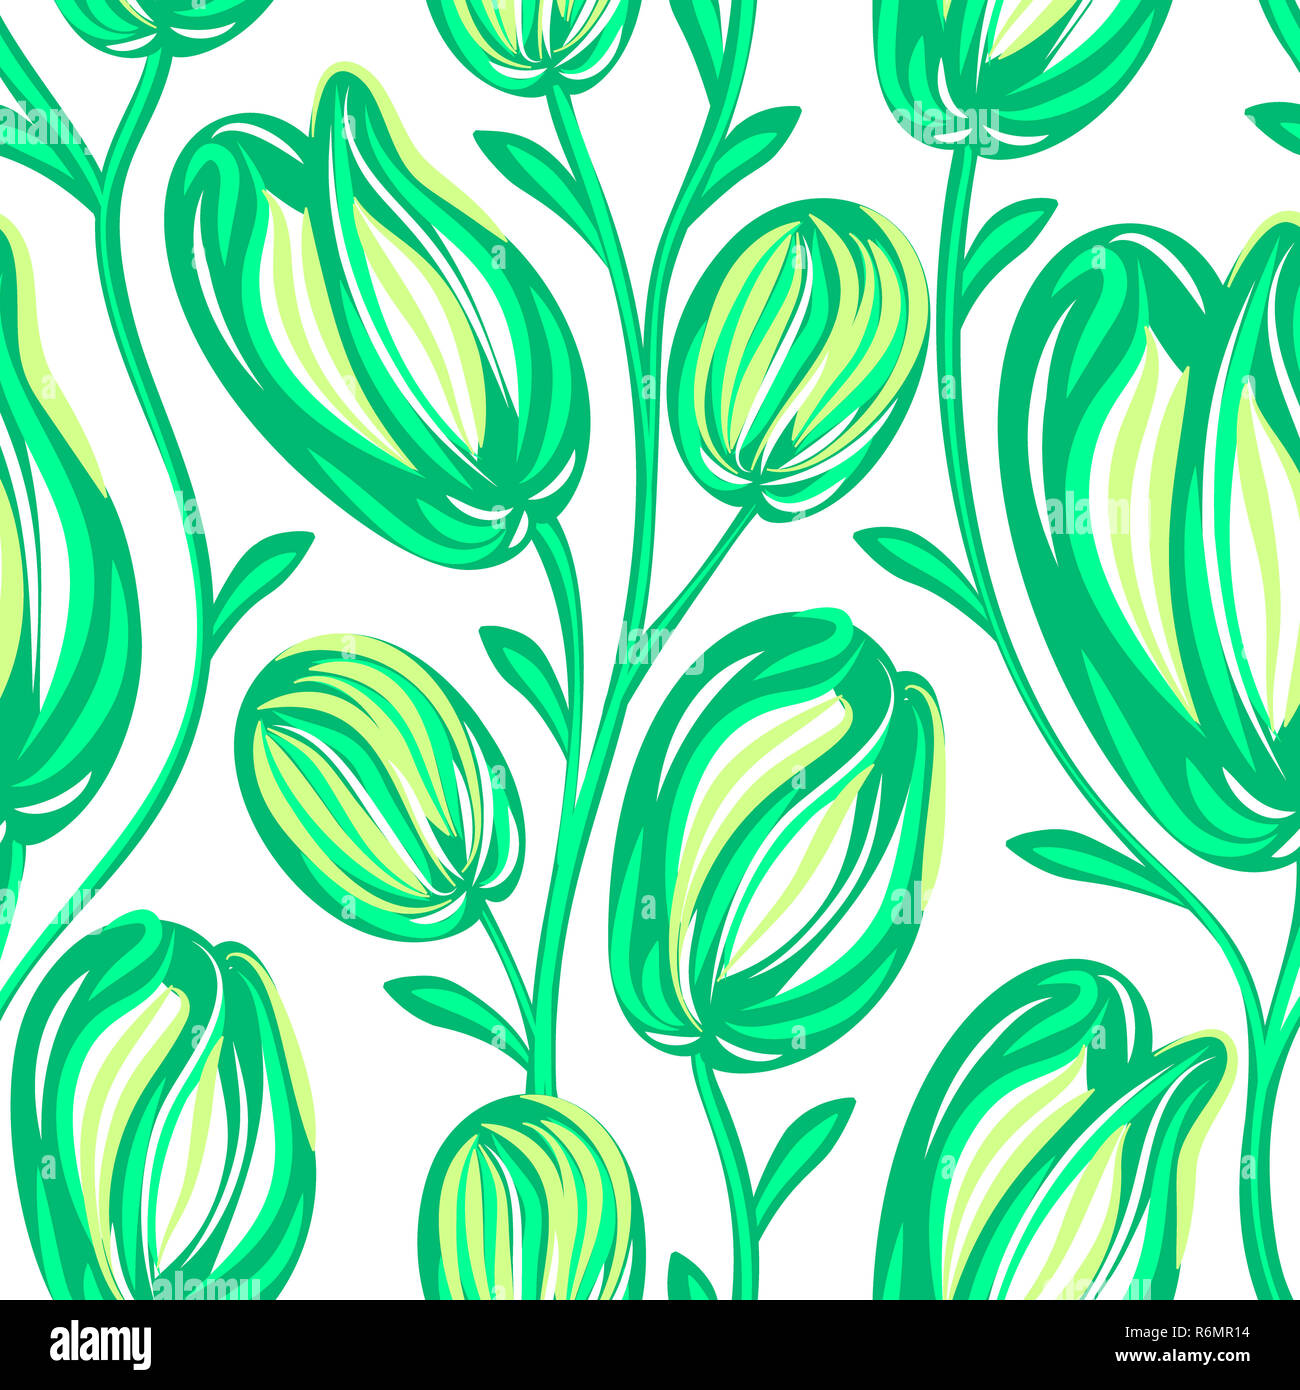 Floral seamless pattern. Hand drawn creative flowers. Colorful artistic background with blossom. Abstract herb Stock Photo